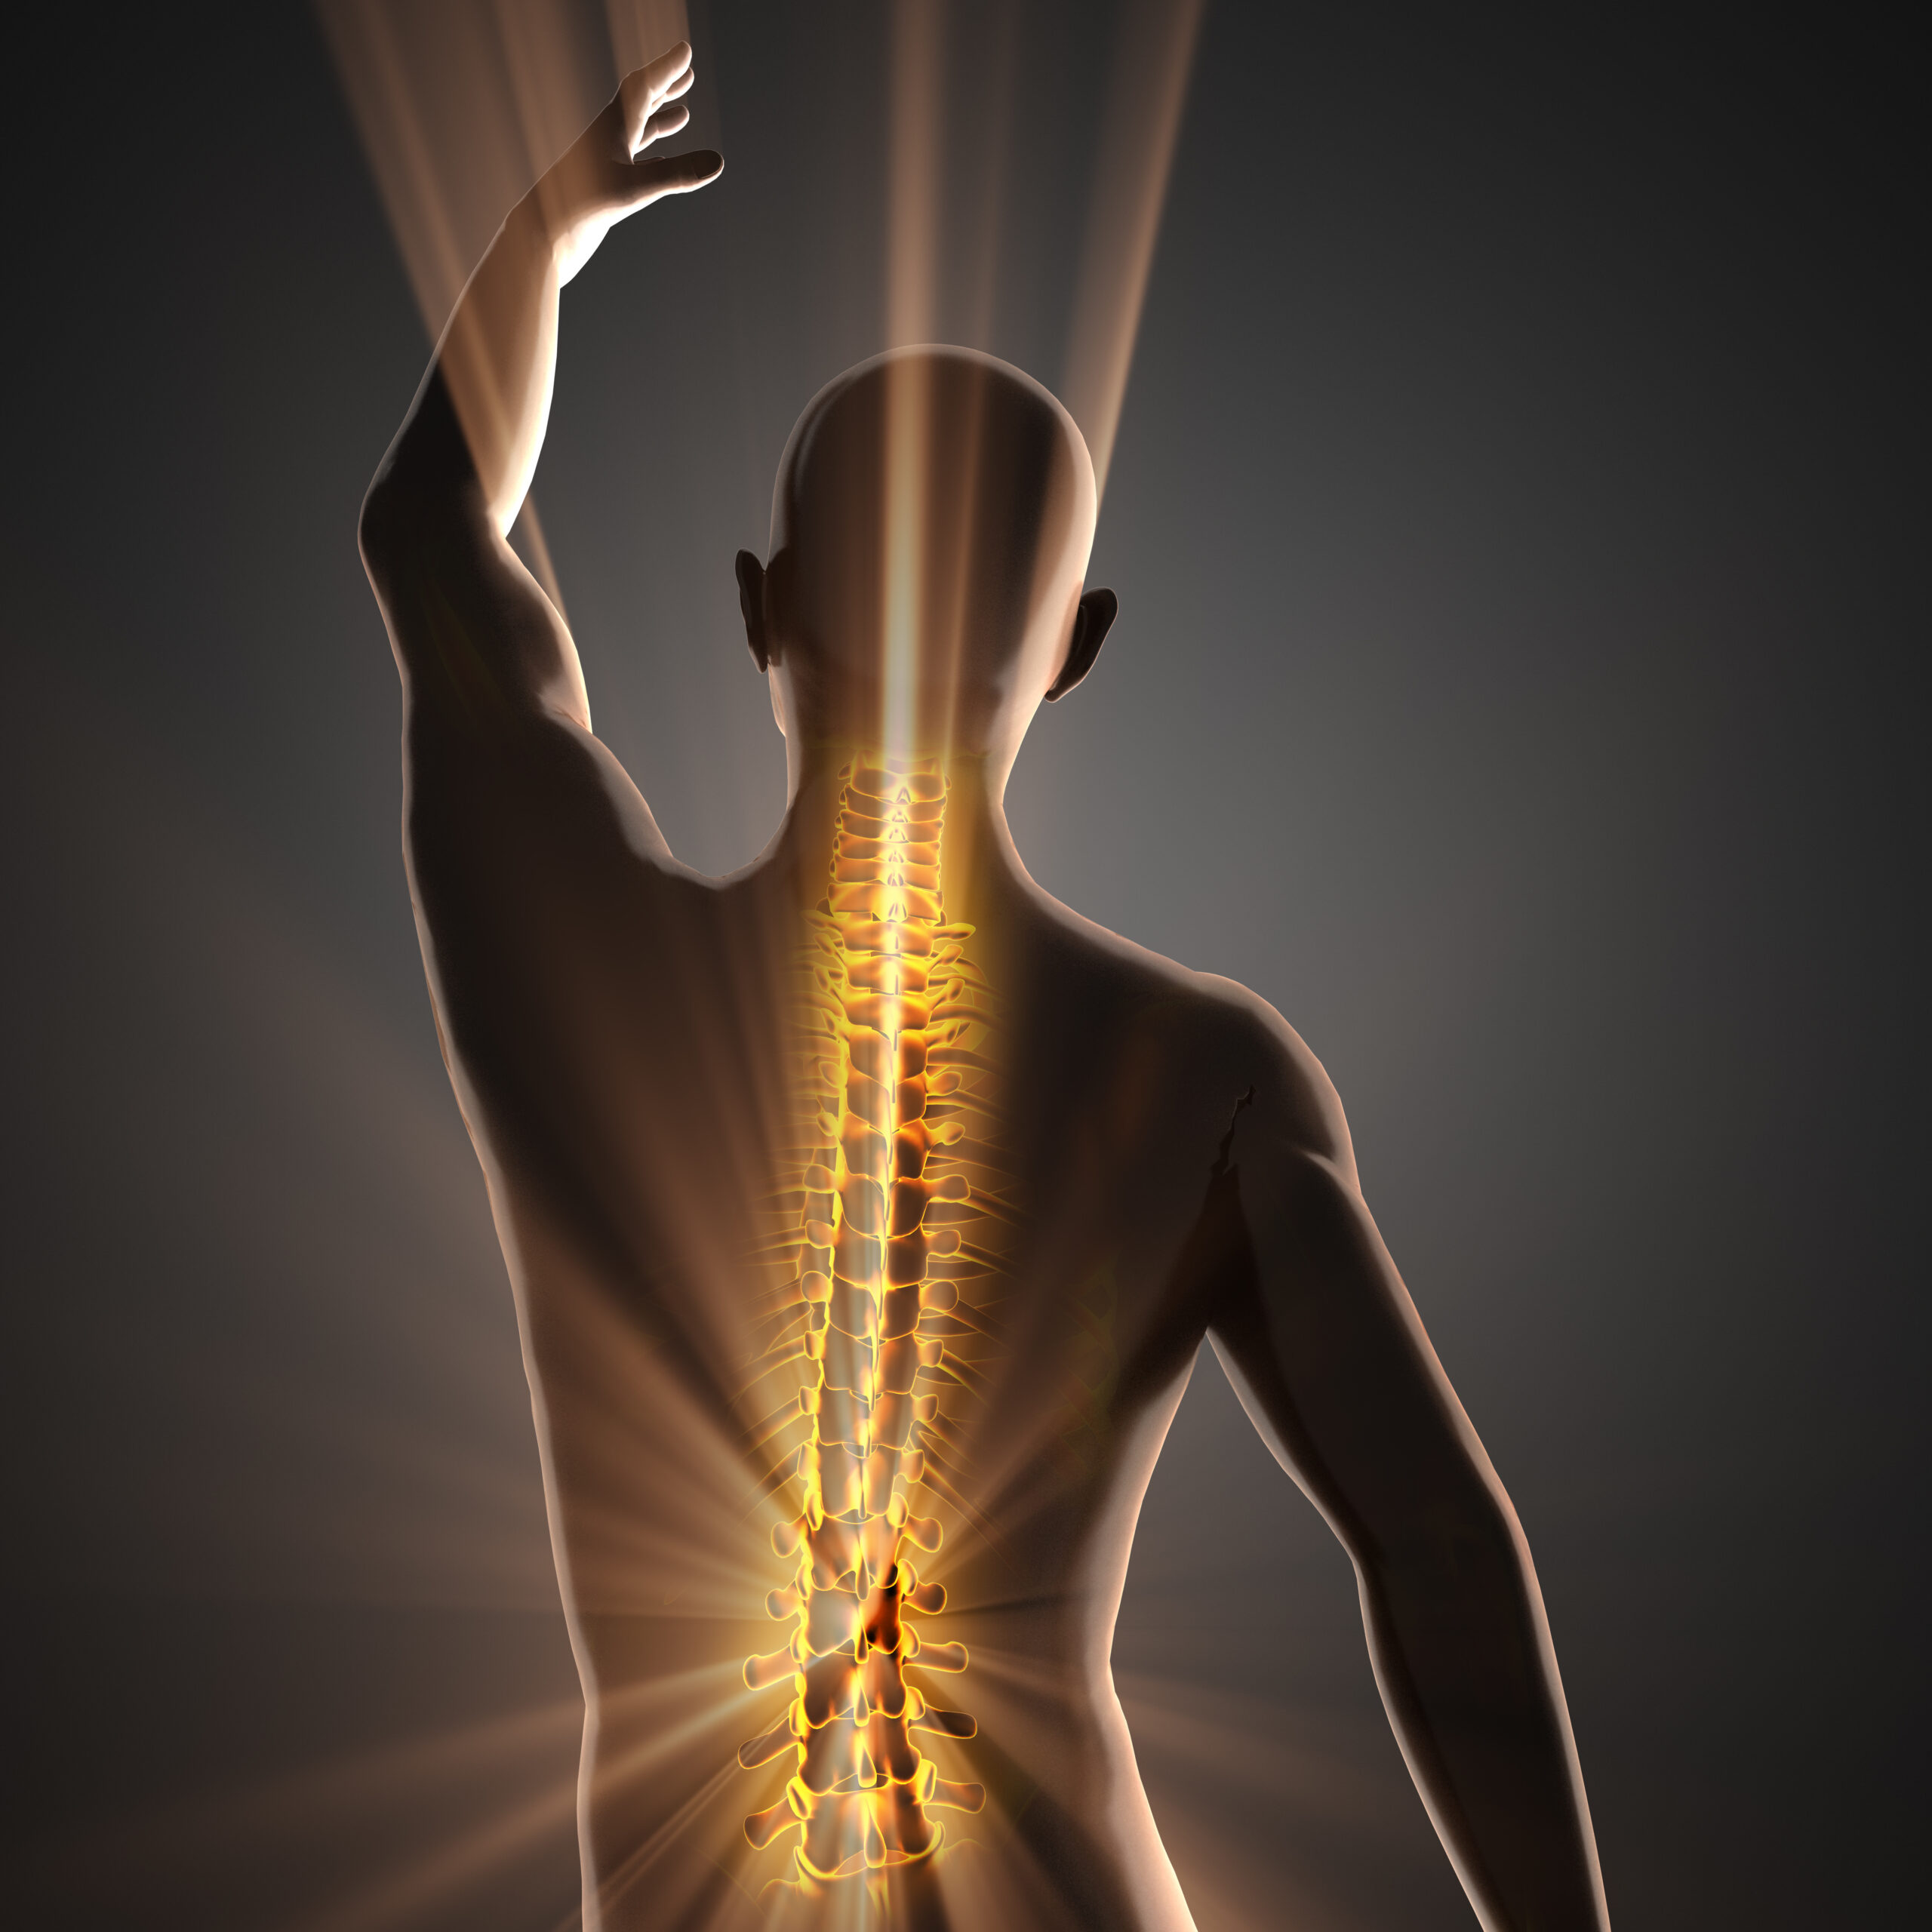 Untapped Potential Of Stem Cells Could Aid Repair Of Spinal Cord Damage